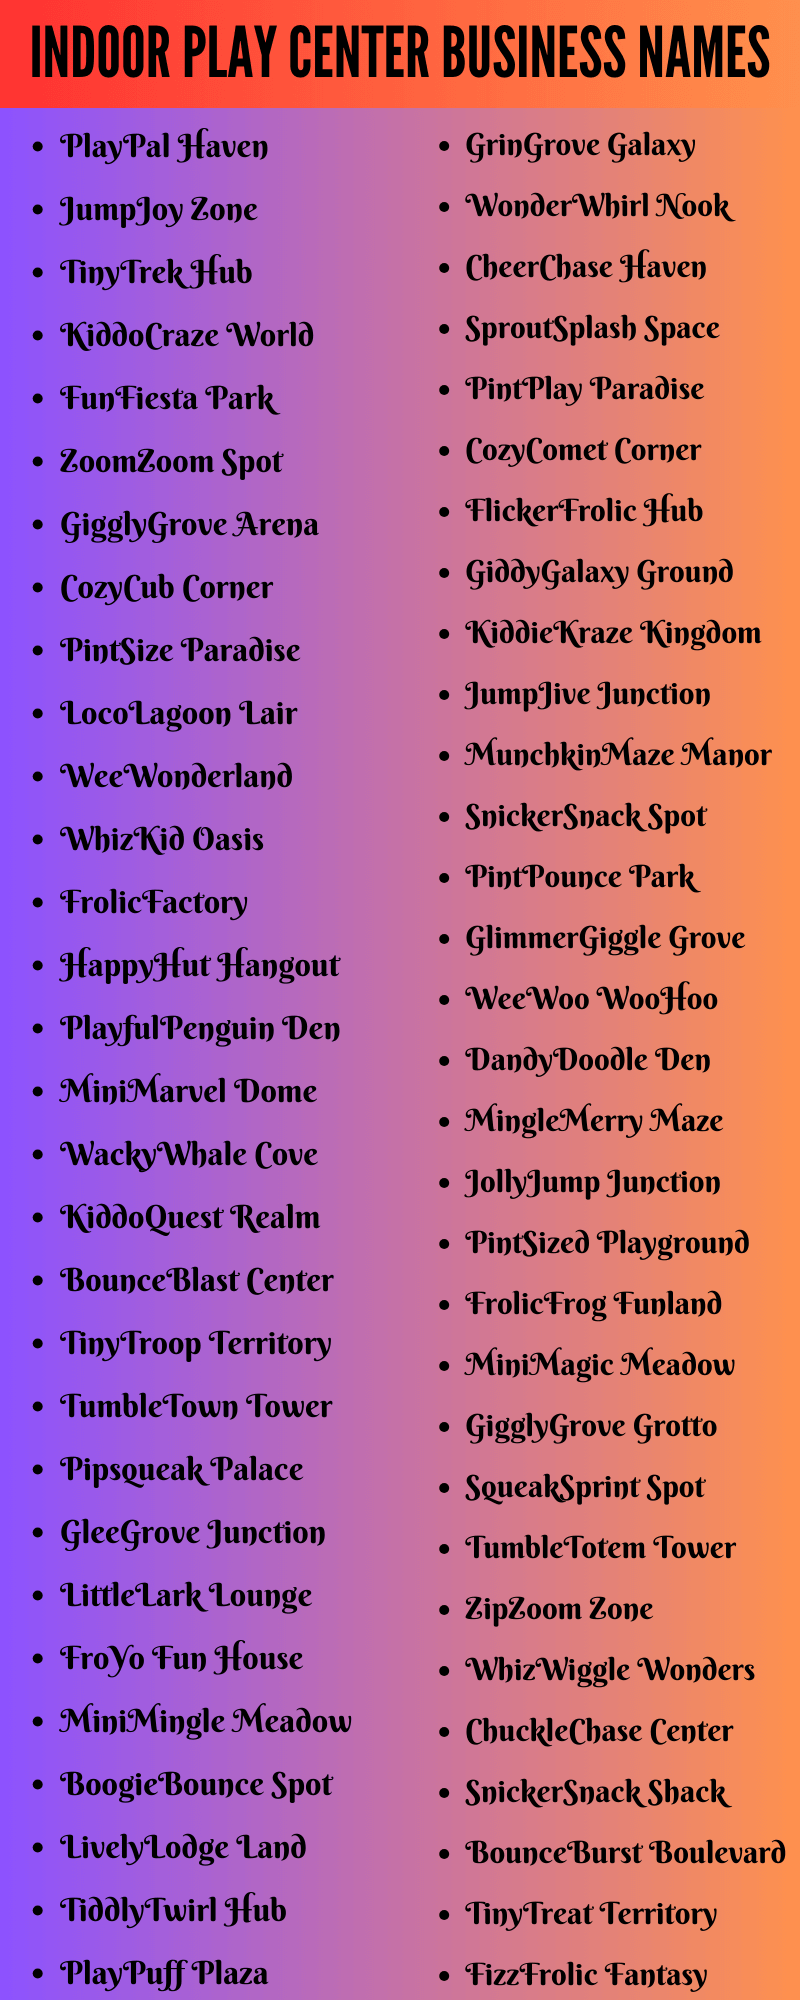 Indoor Play Center Business Names